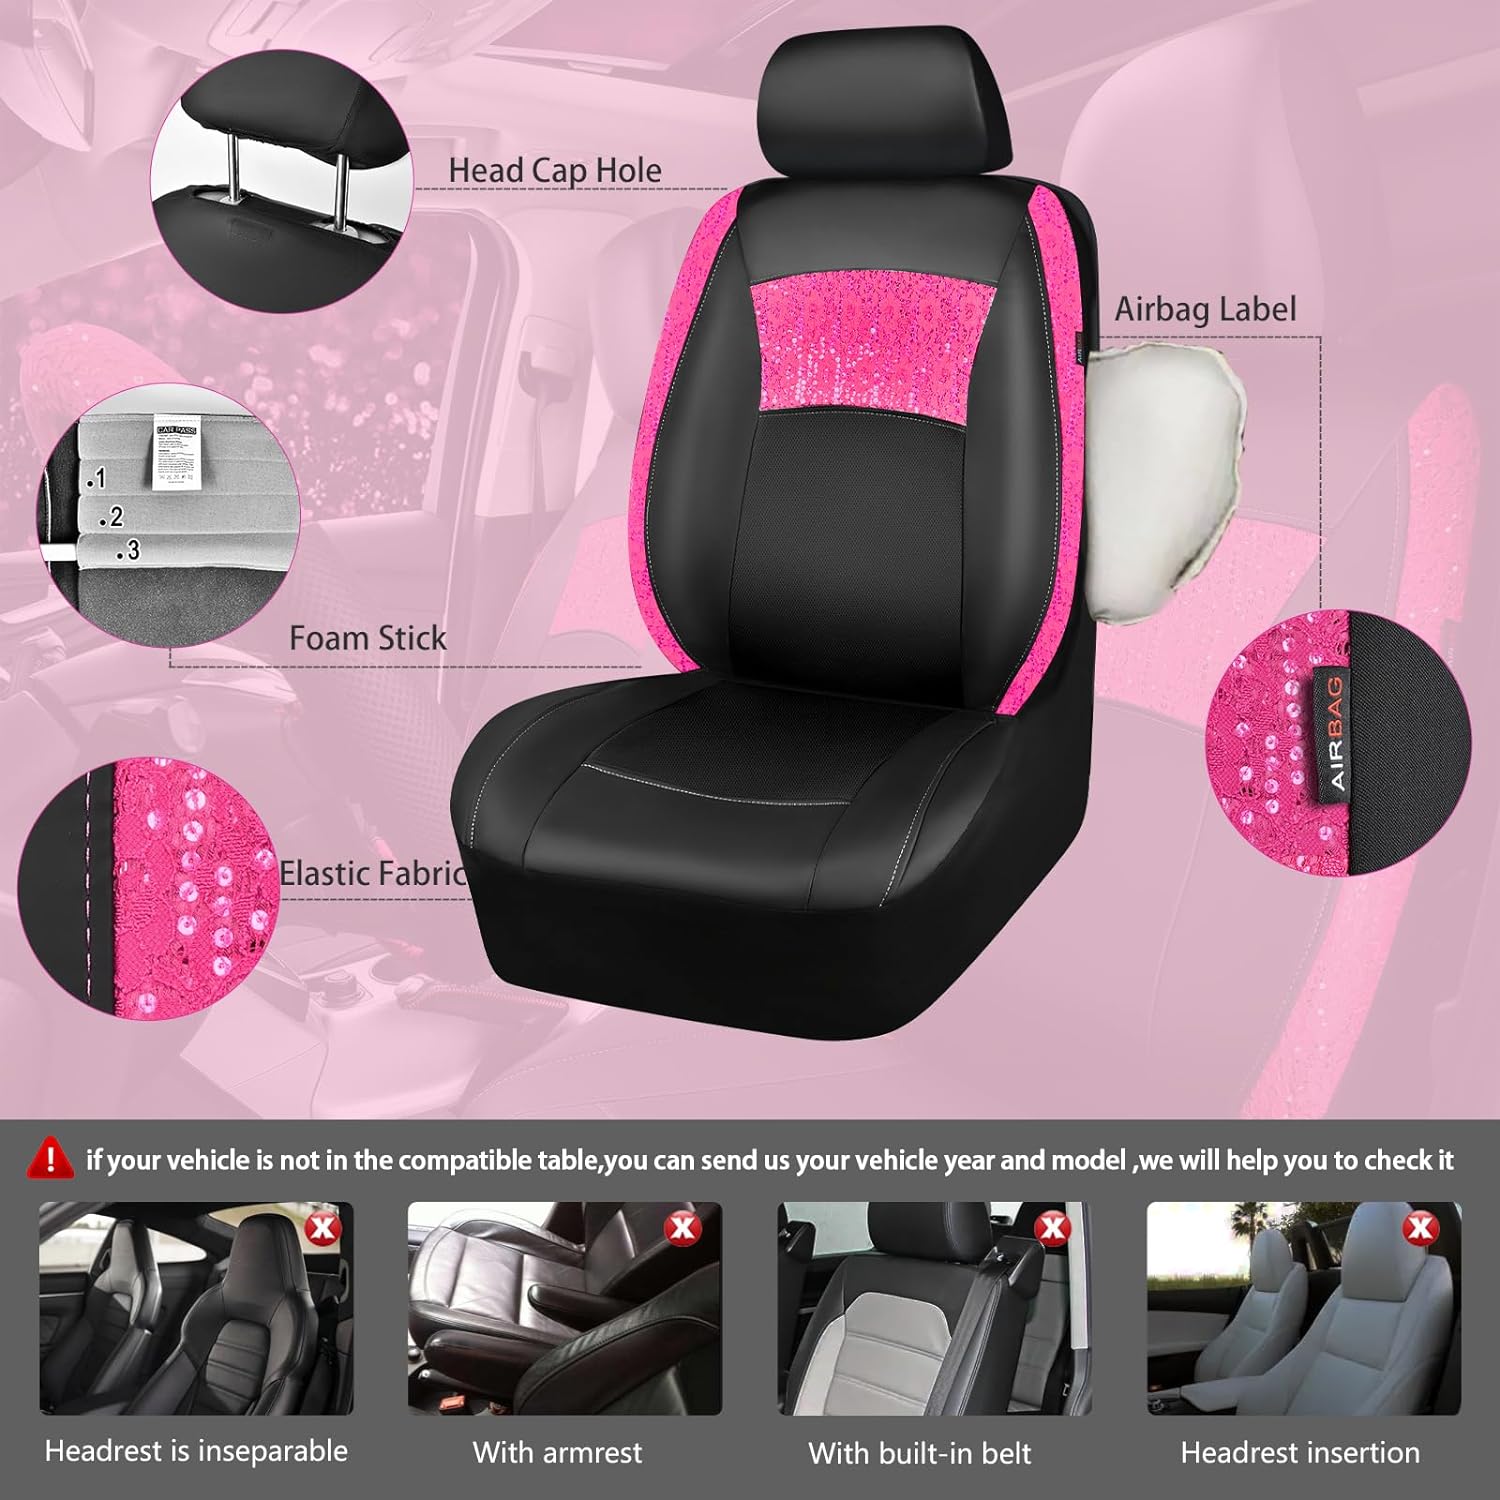 CAR PASS® Universal Leather Pink Lace Car Seat Covers Full Set for Women Girls, Bling Waterproof Car Floor Mats Carpet, Steering Wheel Cover for Car Accessories Interior Sets 10PCS Included